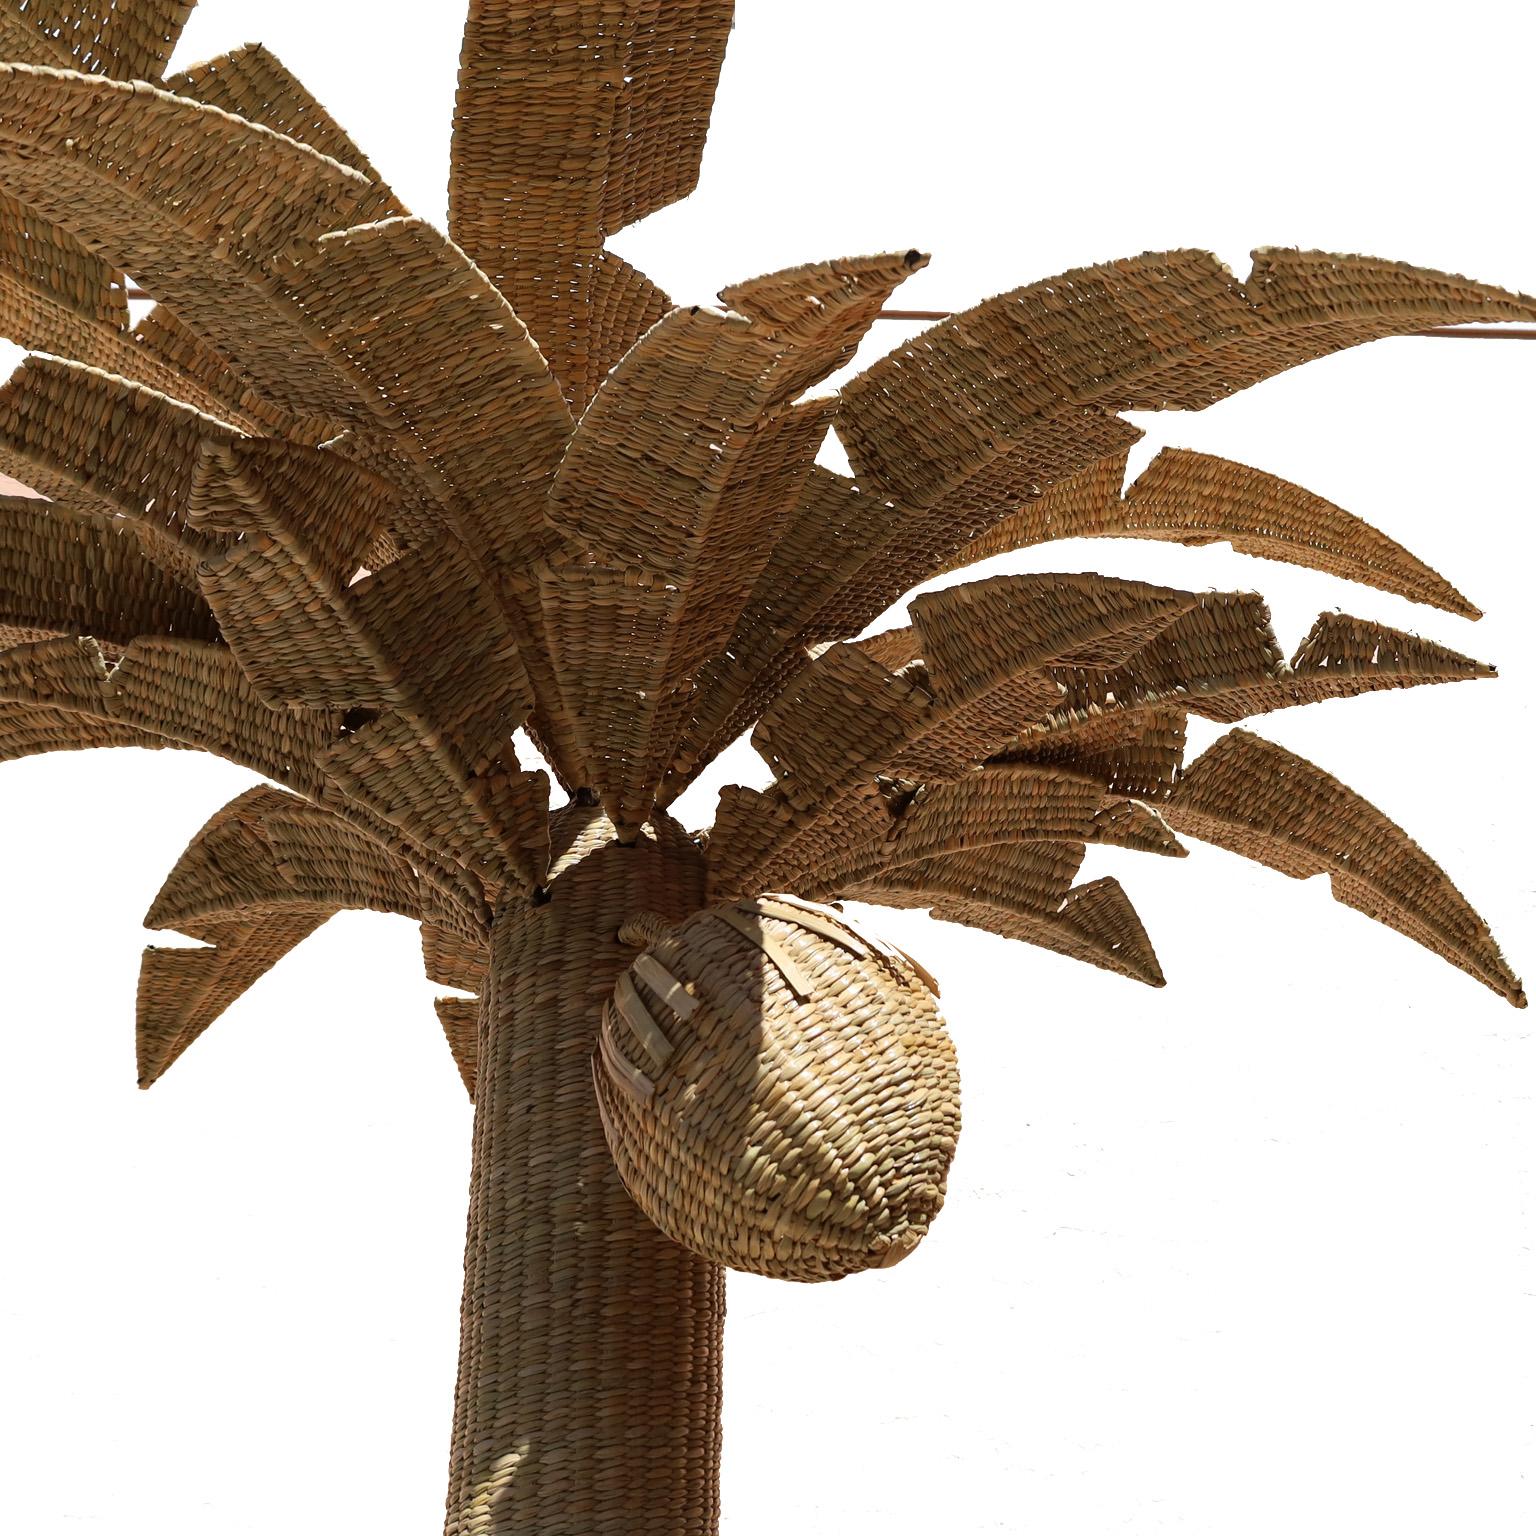 Folk Art Life Size Wicker Palm Tree Sculpture from the FS Flores Collection For Sale